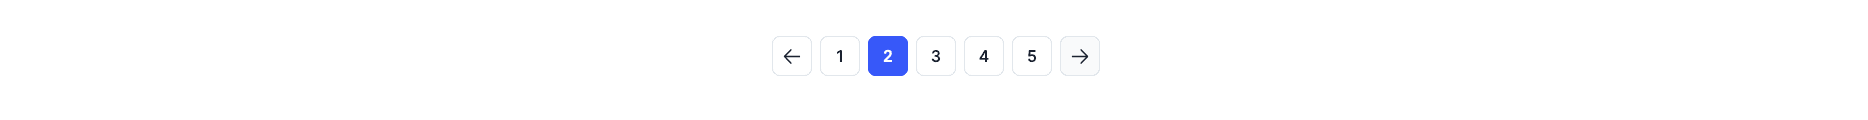 Pagination Style 1